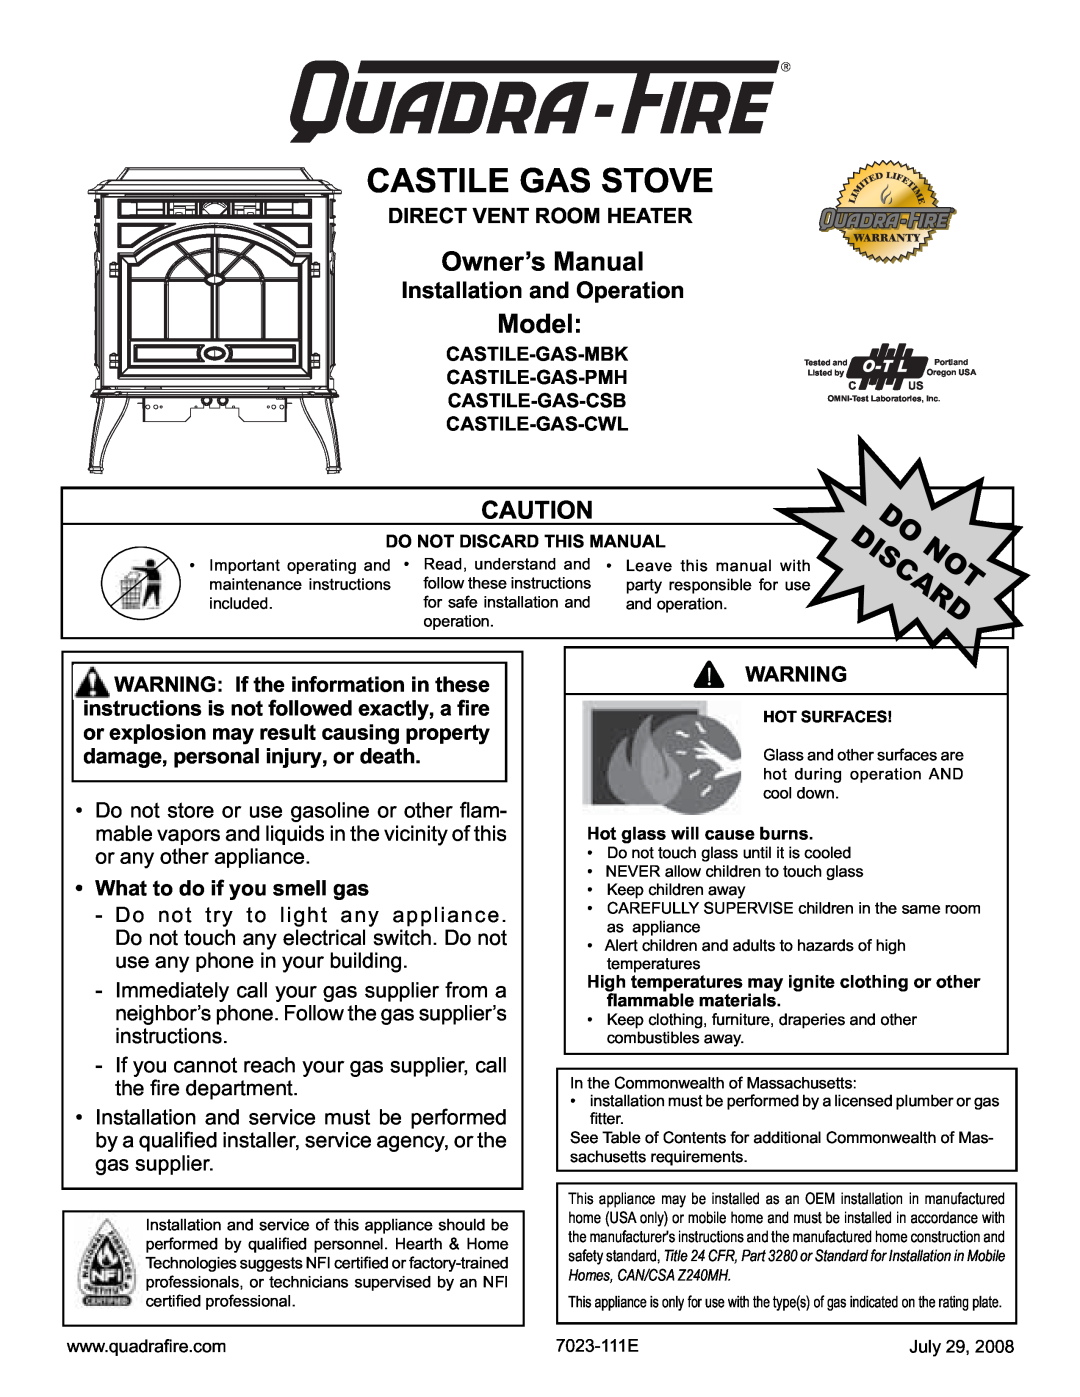 Quadra-Fire CASTILE-GAS-CSB owner manual Direct Vent Room Heater, What to do if you smell gas, Castile Gas Stove, Model 